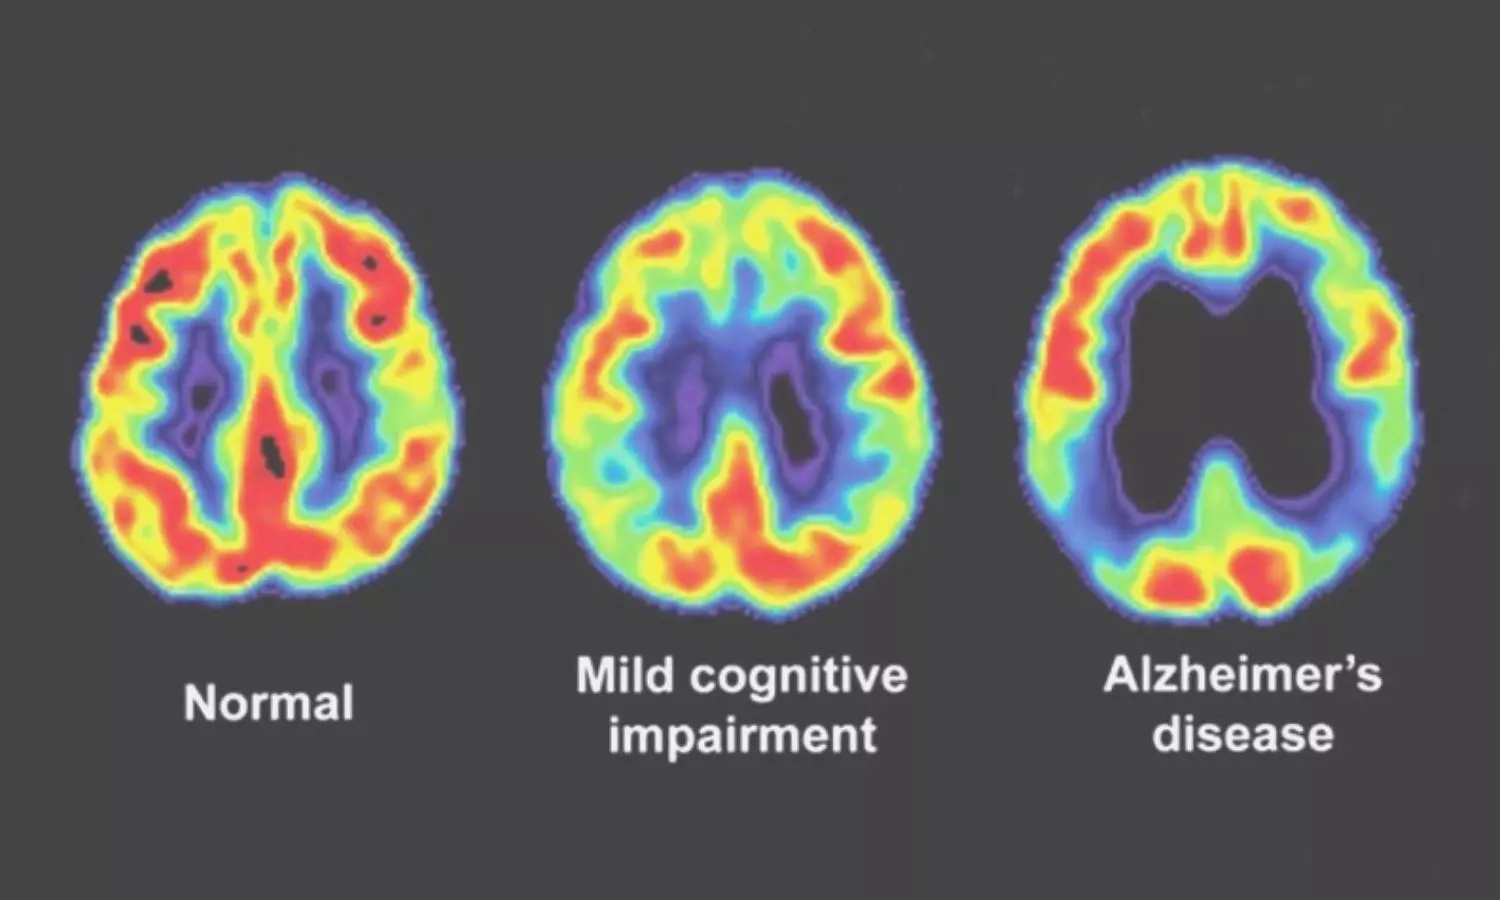 Tau PET imaging can identify Alzheimers subtype associated with psychosis: Study